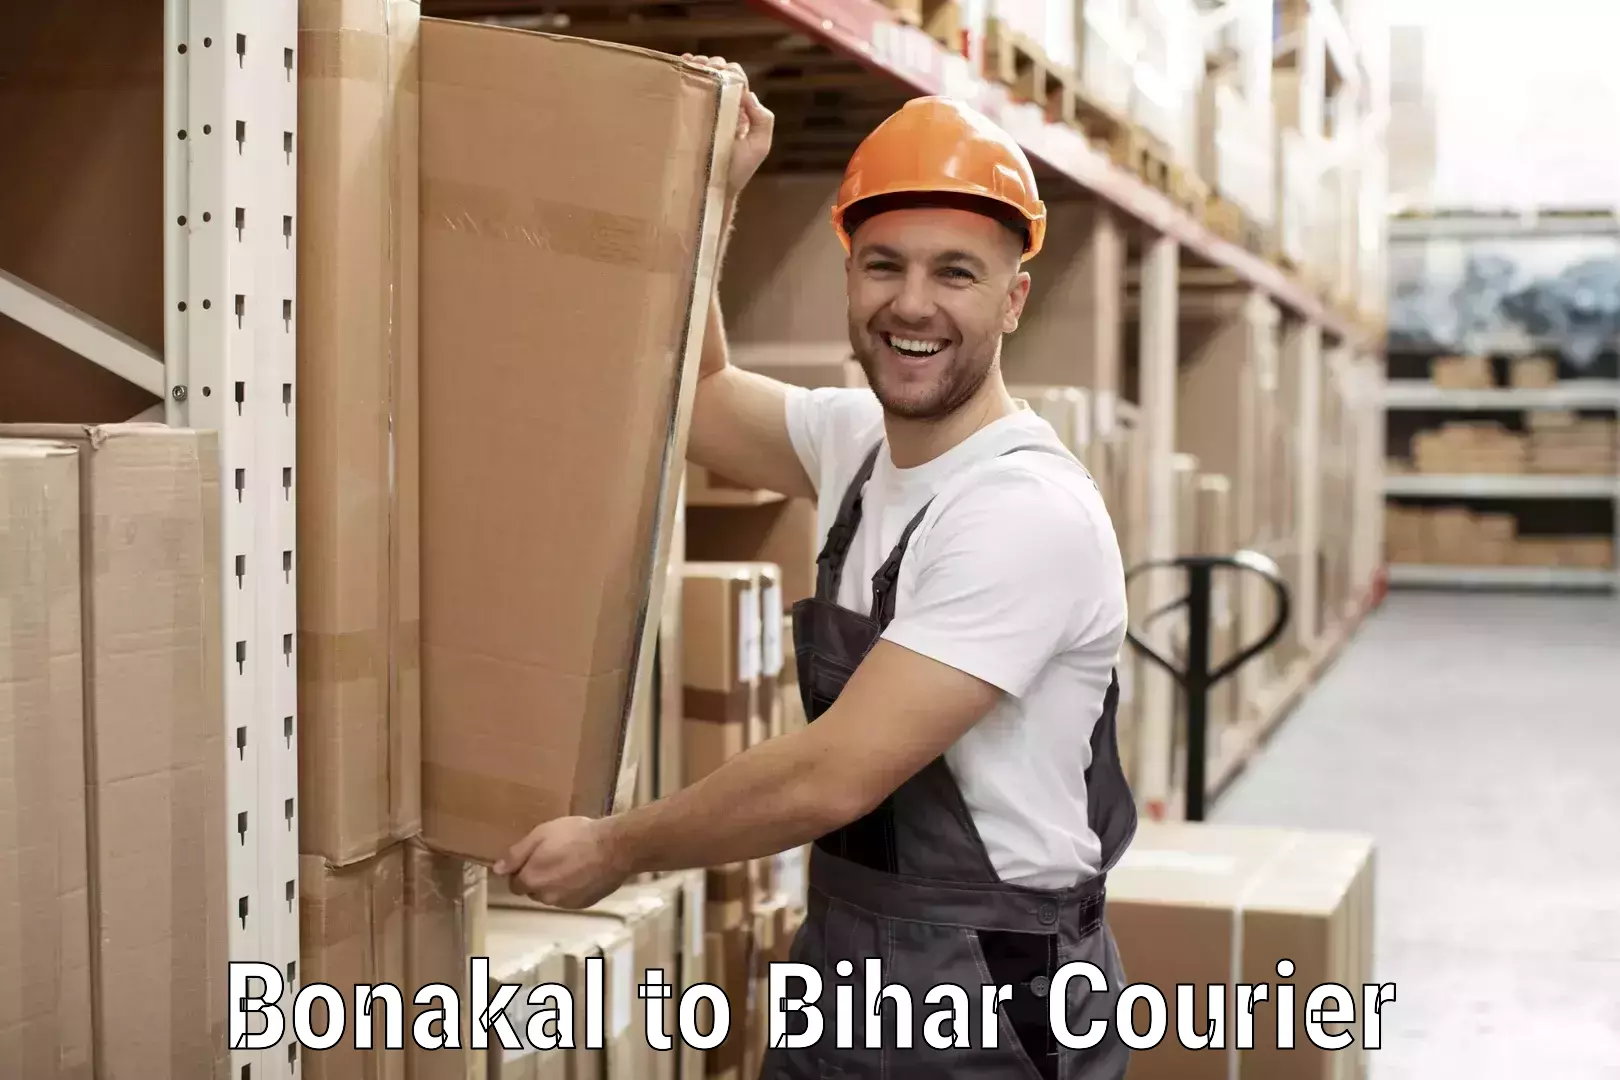 Courier service comparison in Bonakal to Sultanganj